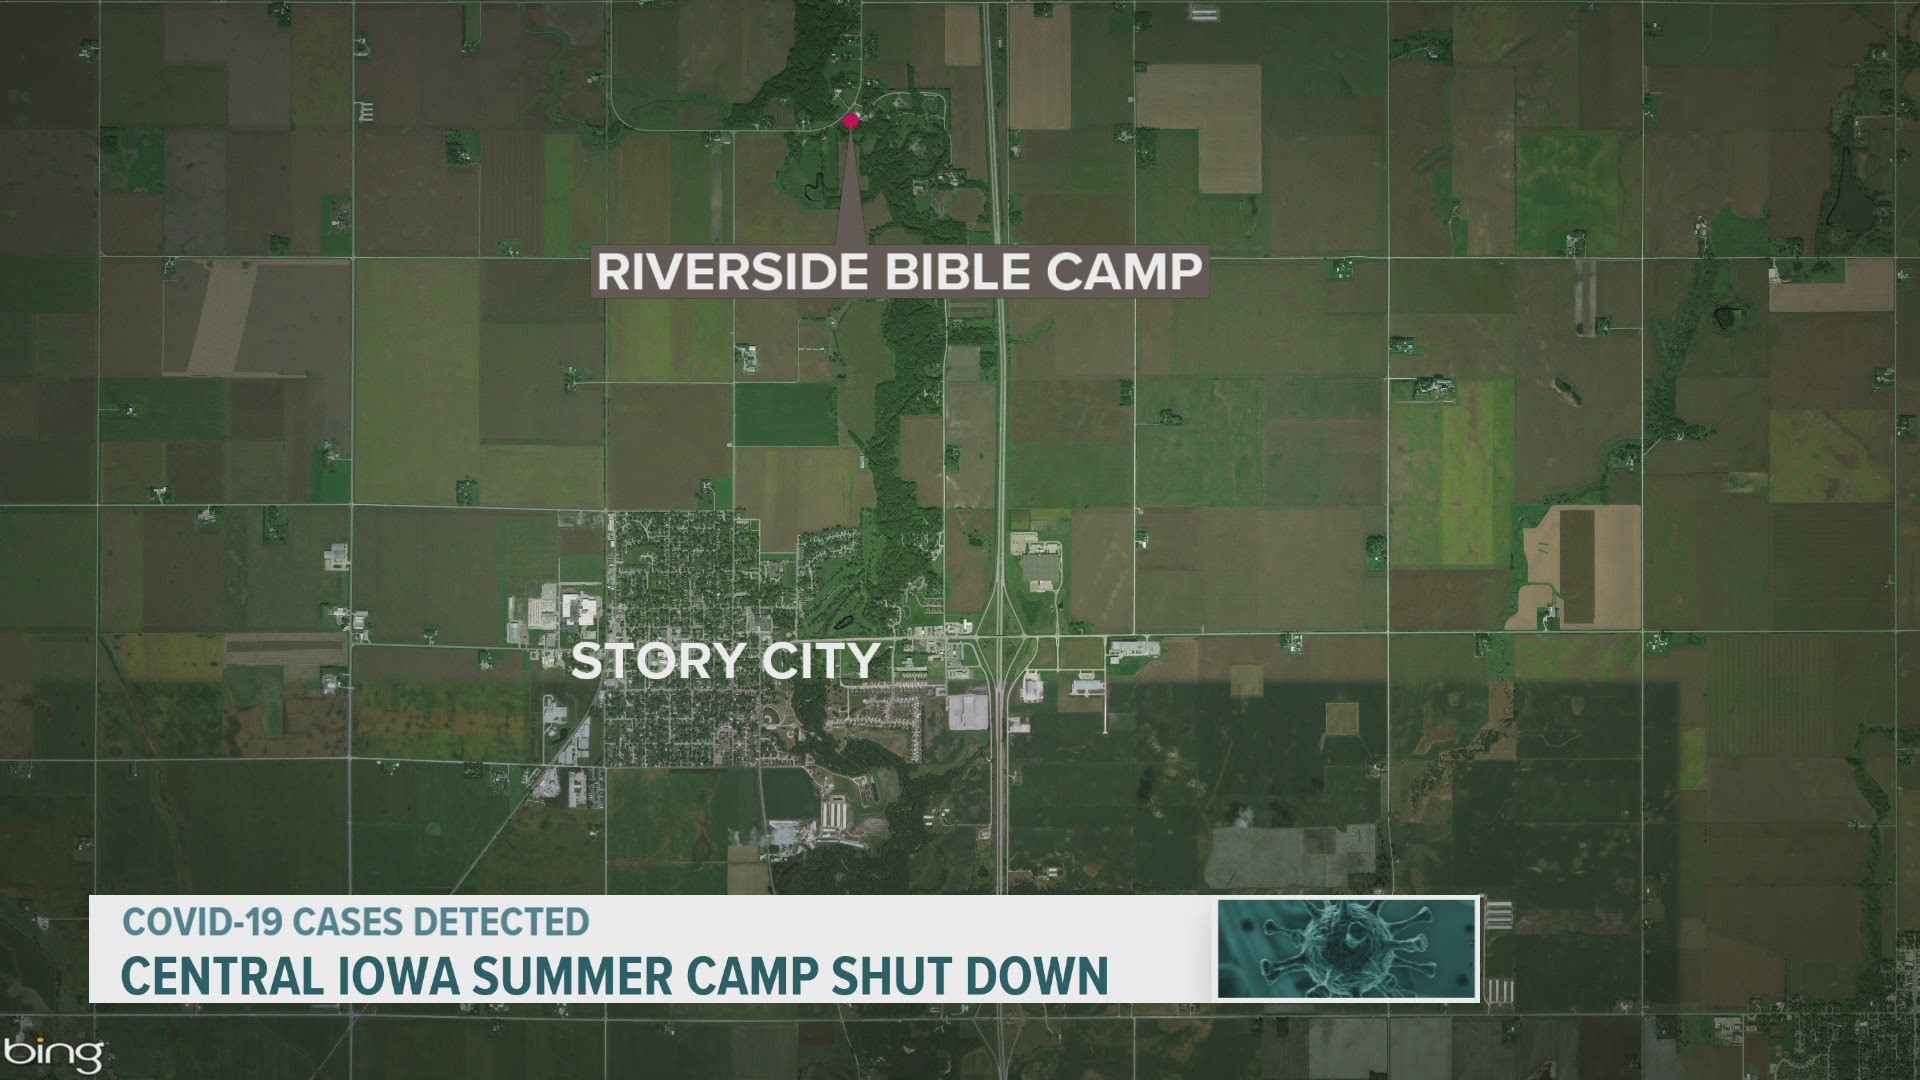 Riverside Lutheran Bible Camp in Story City closed earlier than anticipated last week because staffers got sick.